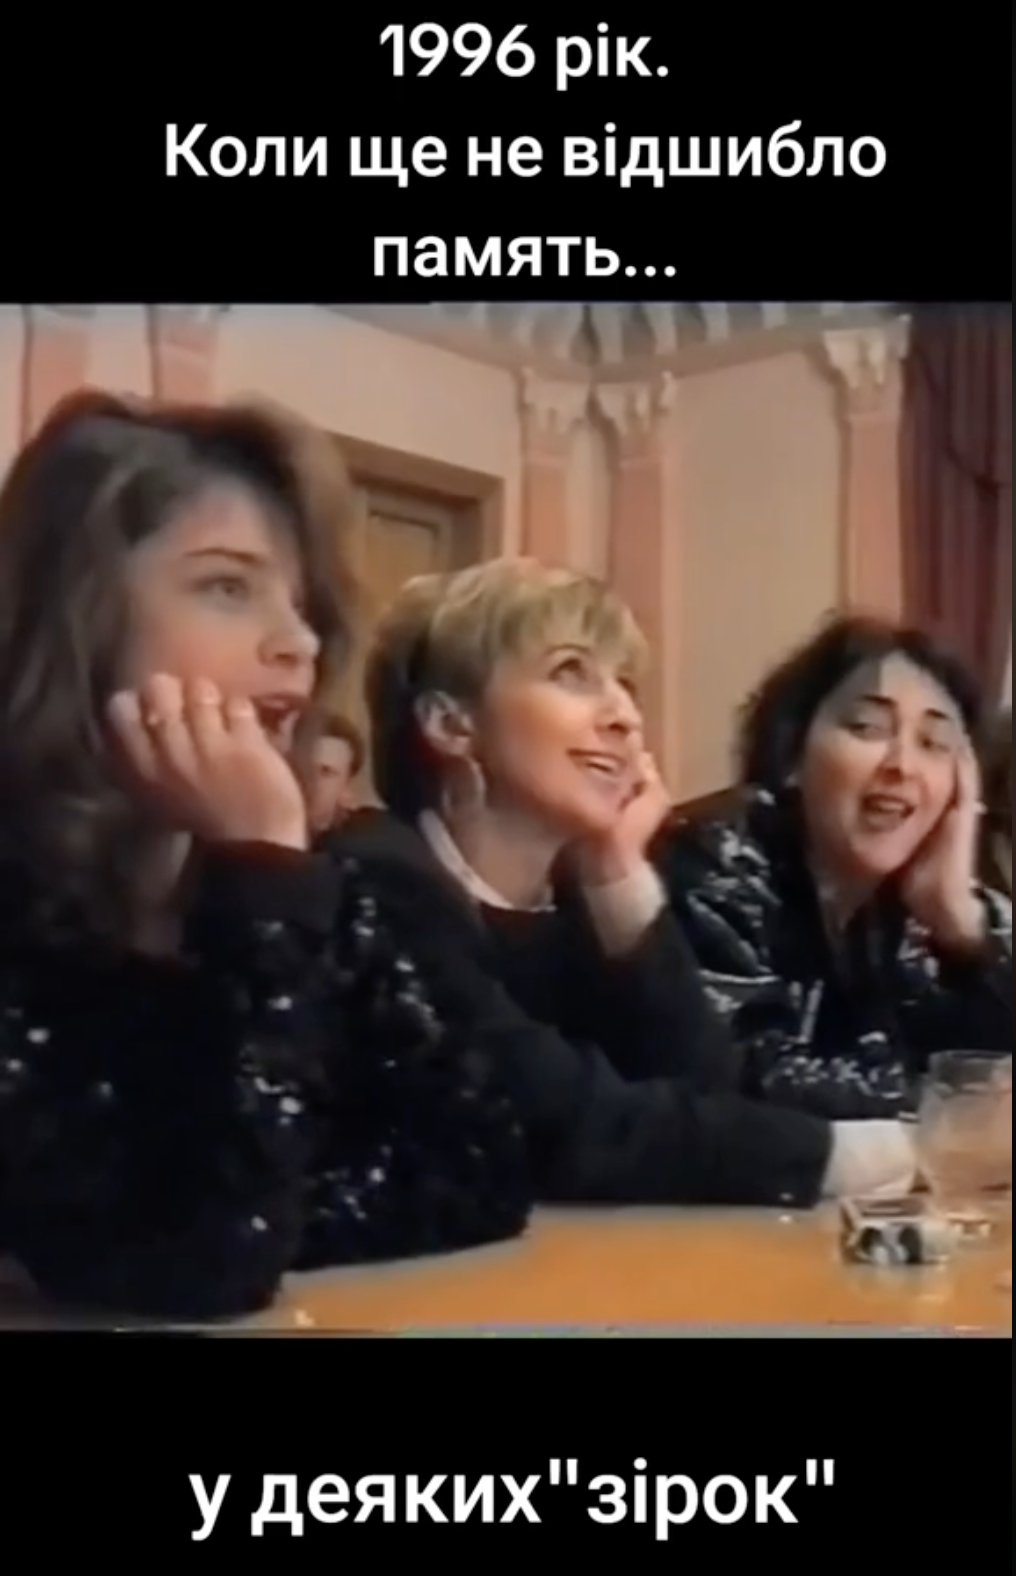 Natasha Korolova, Tetiana Ovsiienko, and Lolita singing ''In a Grove by the Danube'' in Ukrainian: an archival video surfaces online